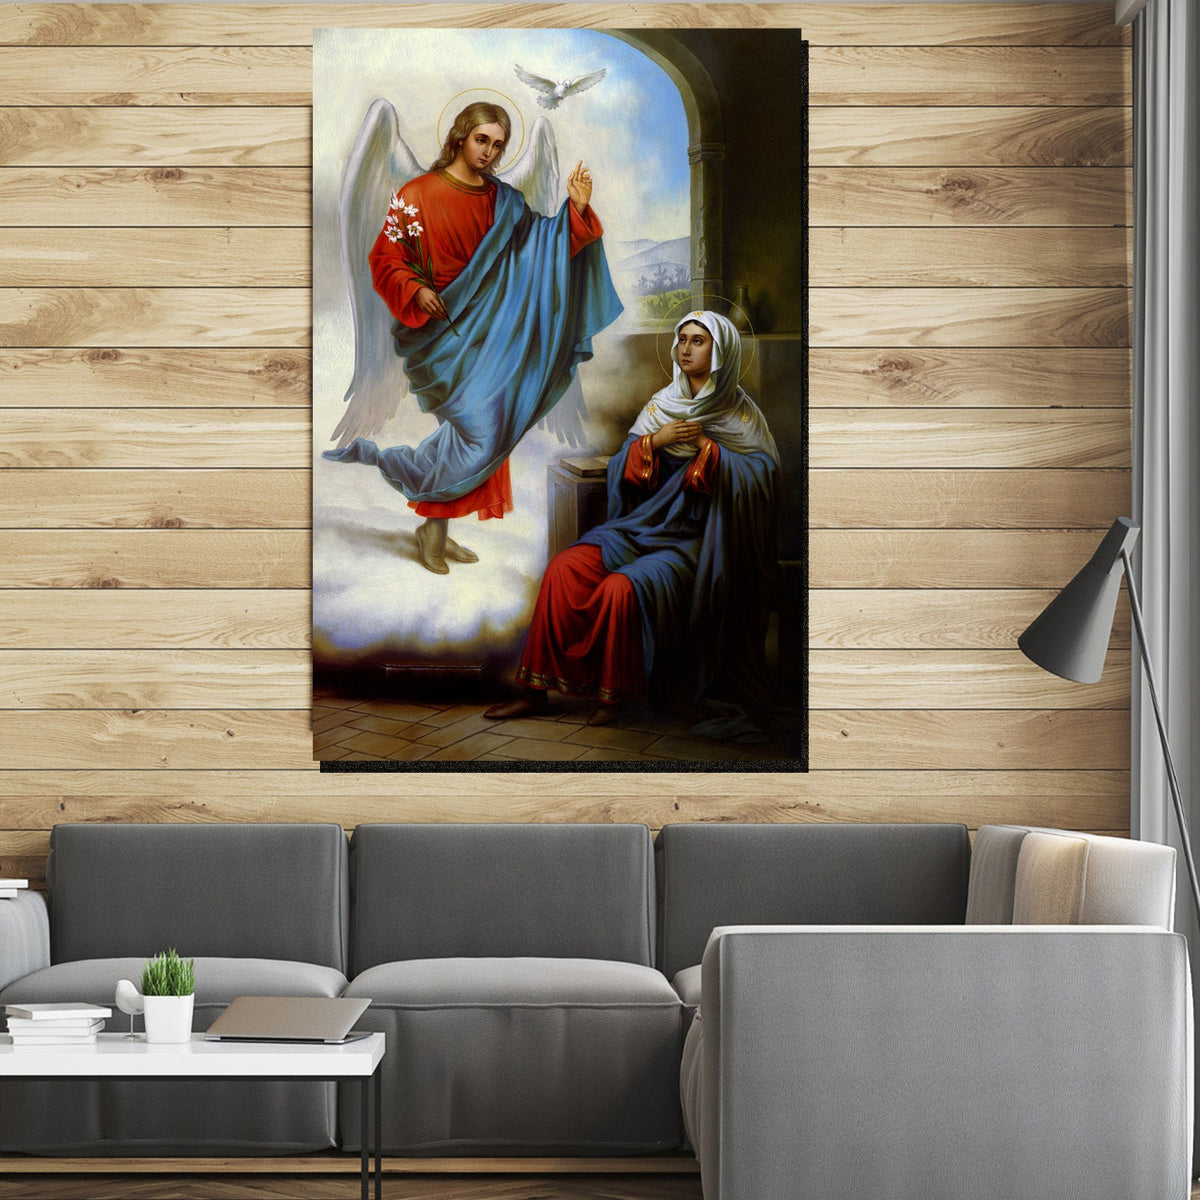 https://cdn.shopify.com/s/files/1/0387/9986/8044/products/TheAnnunciationoftheBlessedMary.jpg